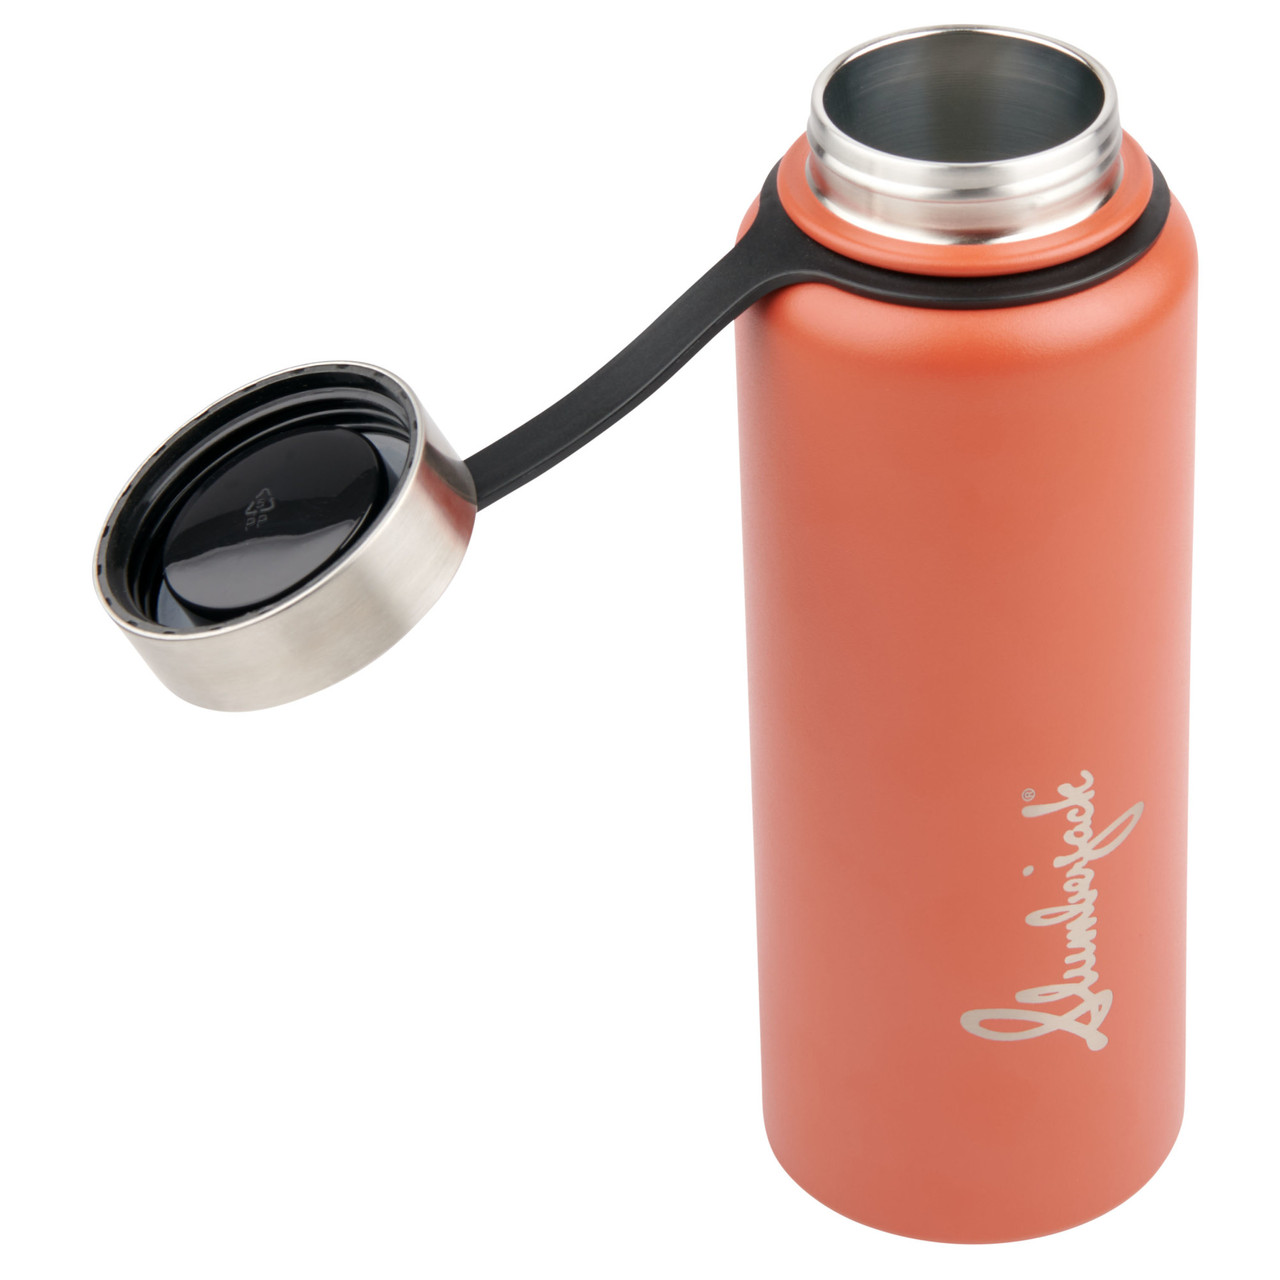 Canfield Bikes Stainless Insulated Water Bottle - 32 oz.